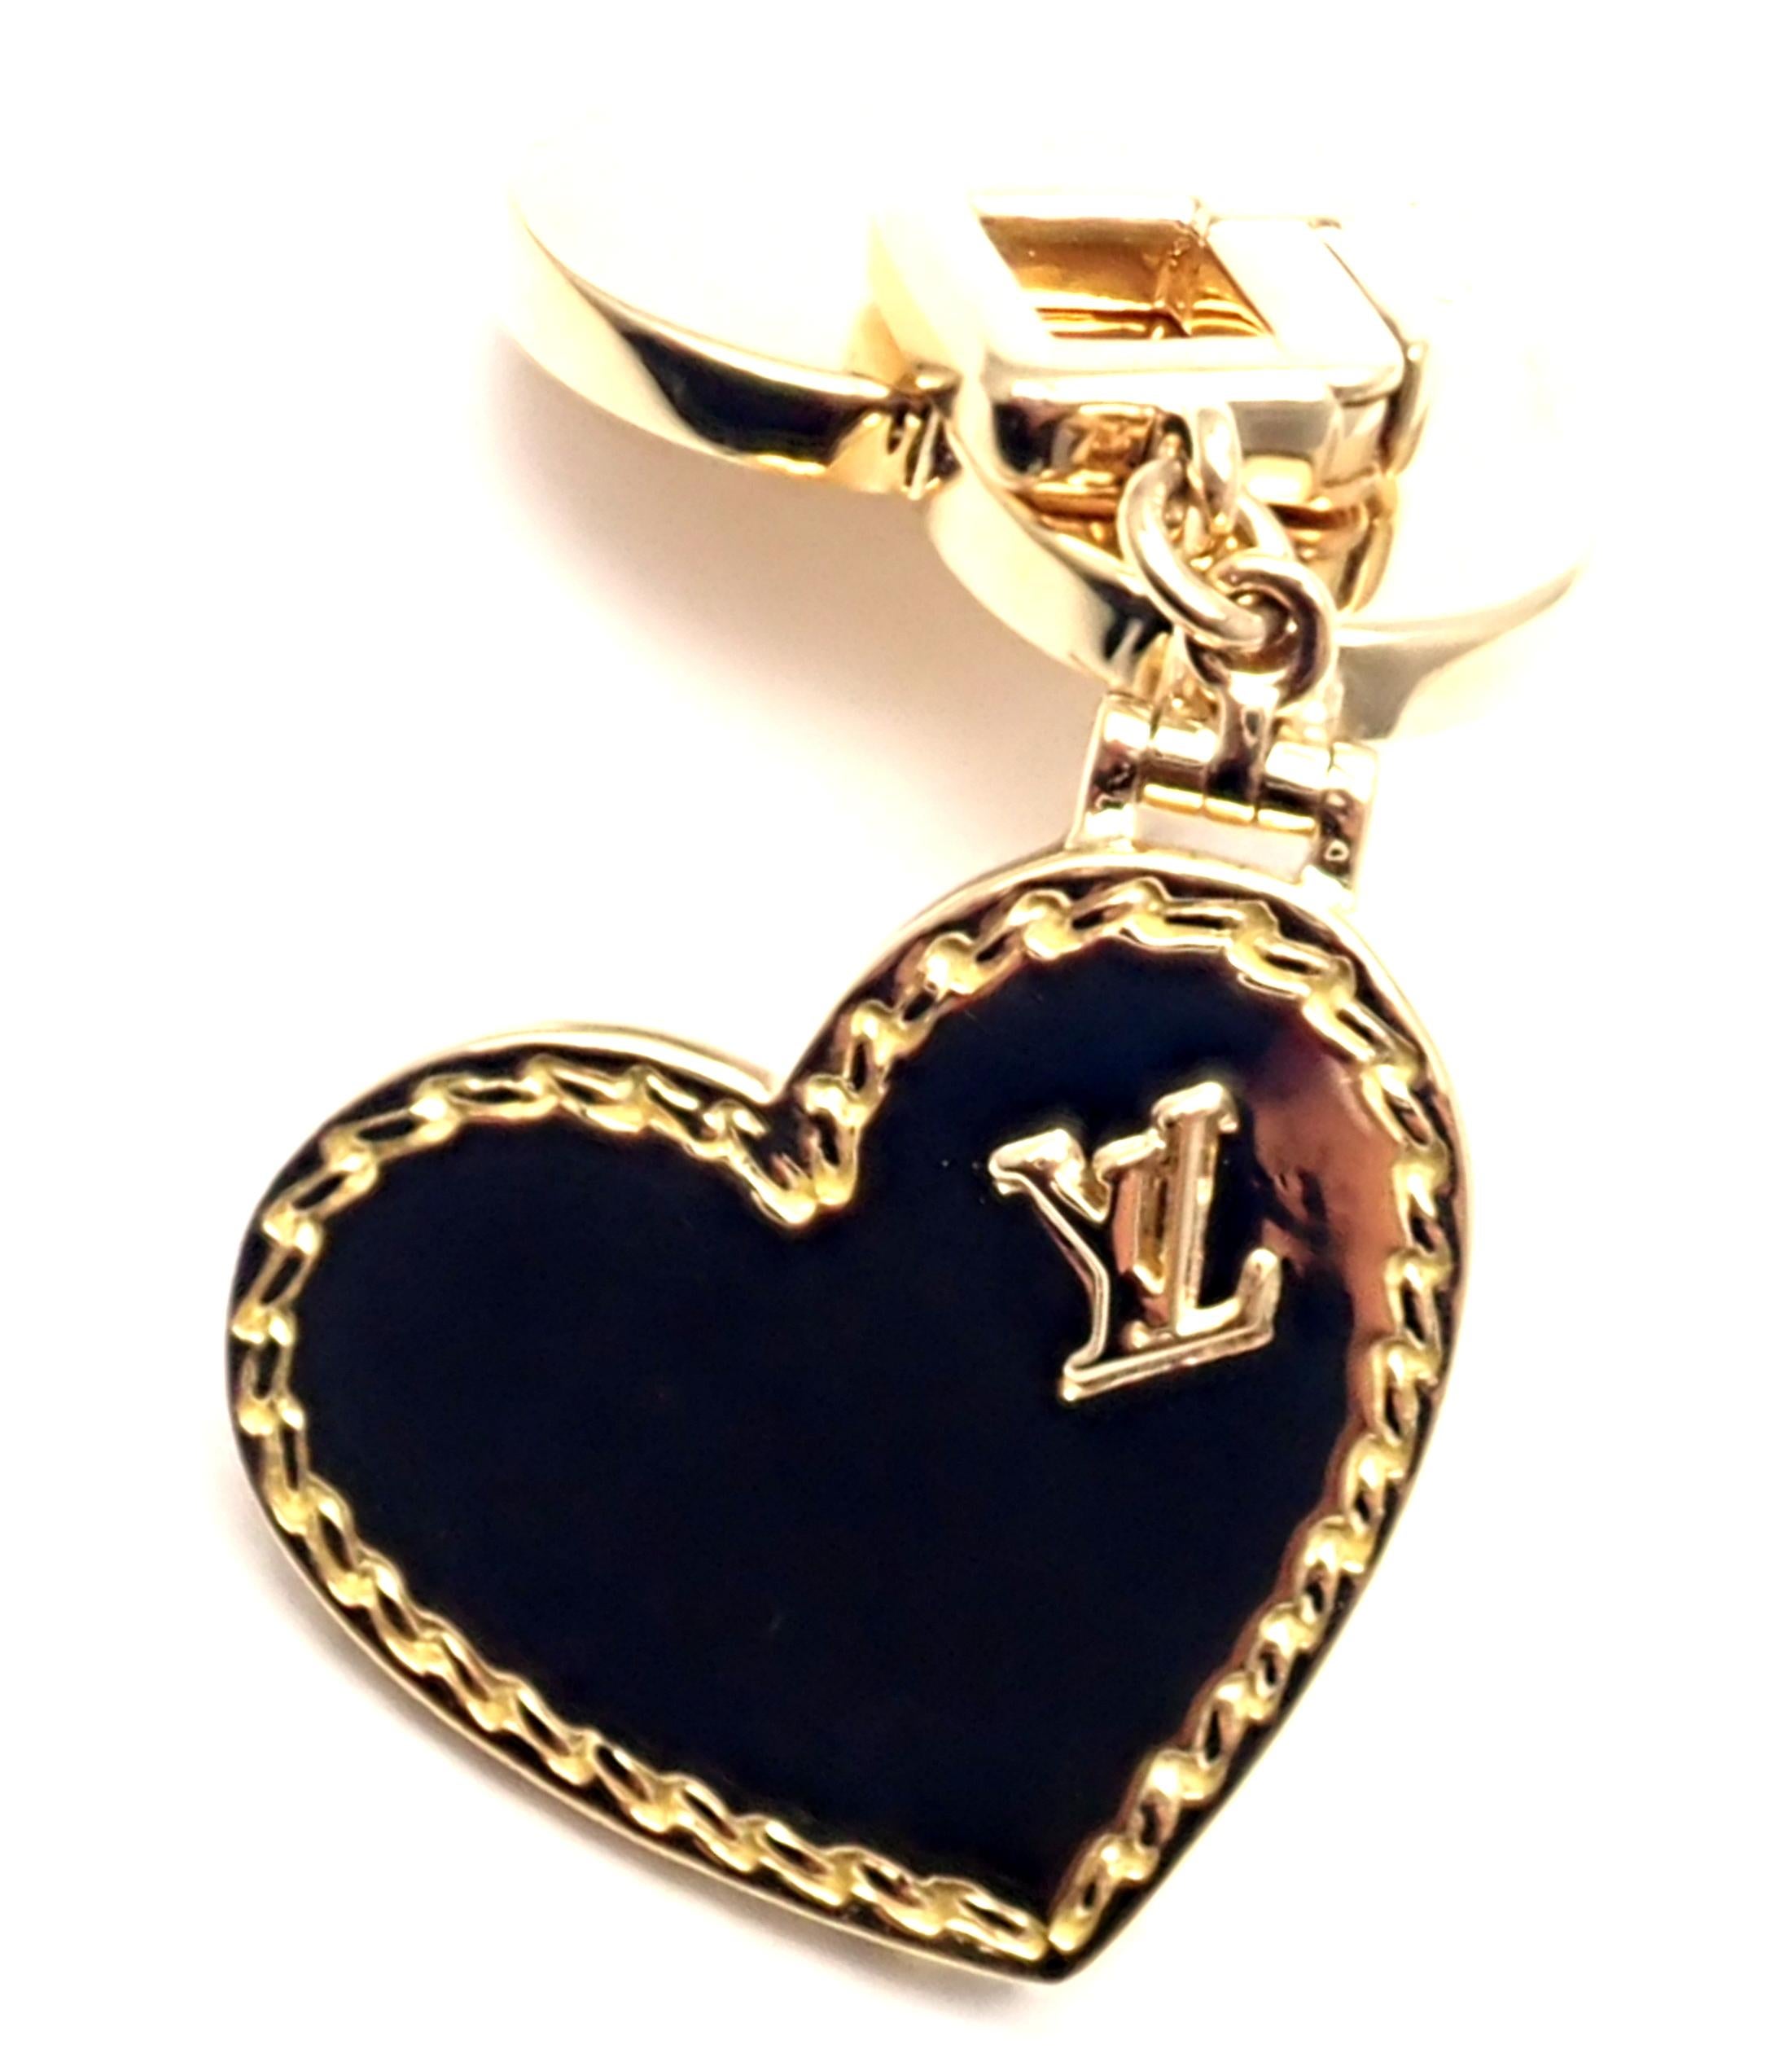 18k Yellow Gold Large Locket Pendant Charm by Louis Vuitton. 
Details: 
Measurements: 39mm x 20mm
Weight: 15.5 grams
Stamped Hallmarks: Louis Vuitton Paris LV French Hallmarks DBB709
*Free Shipping within the United States*
YOUR PRICE: